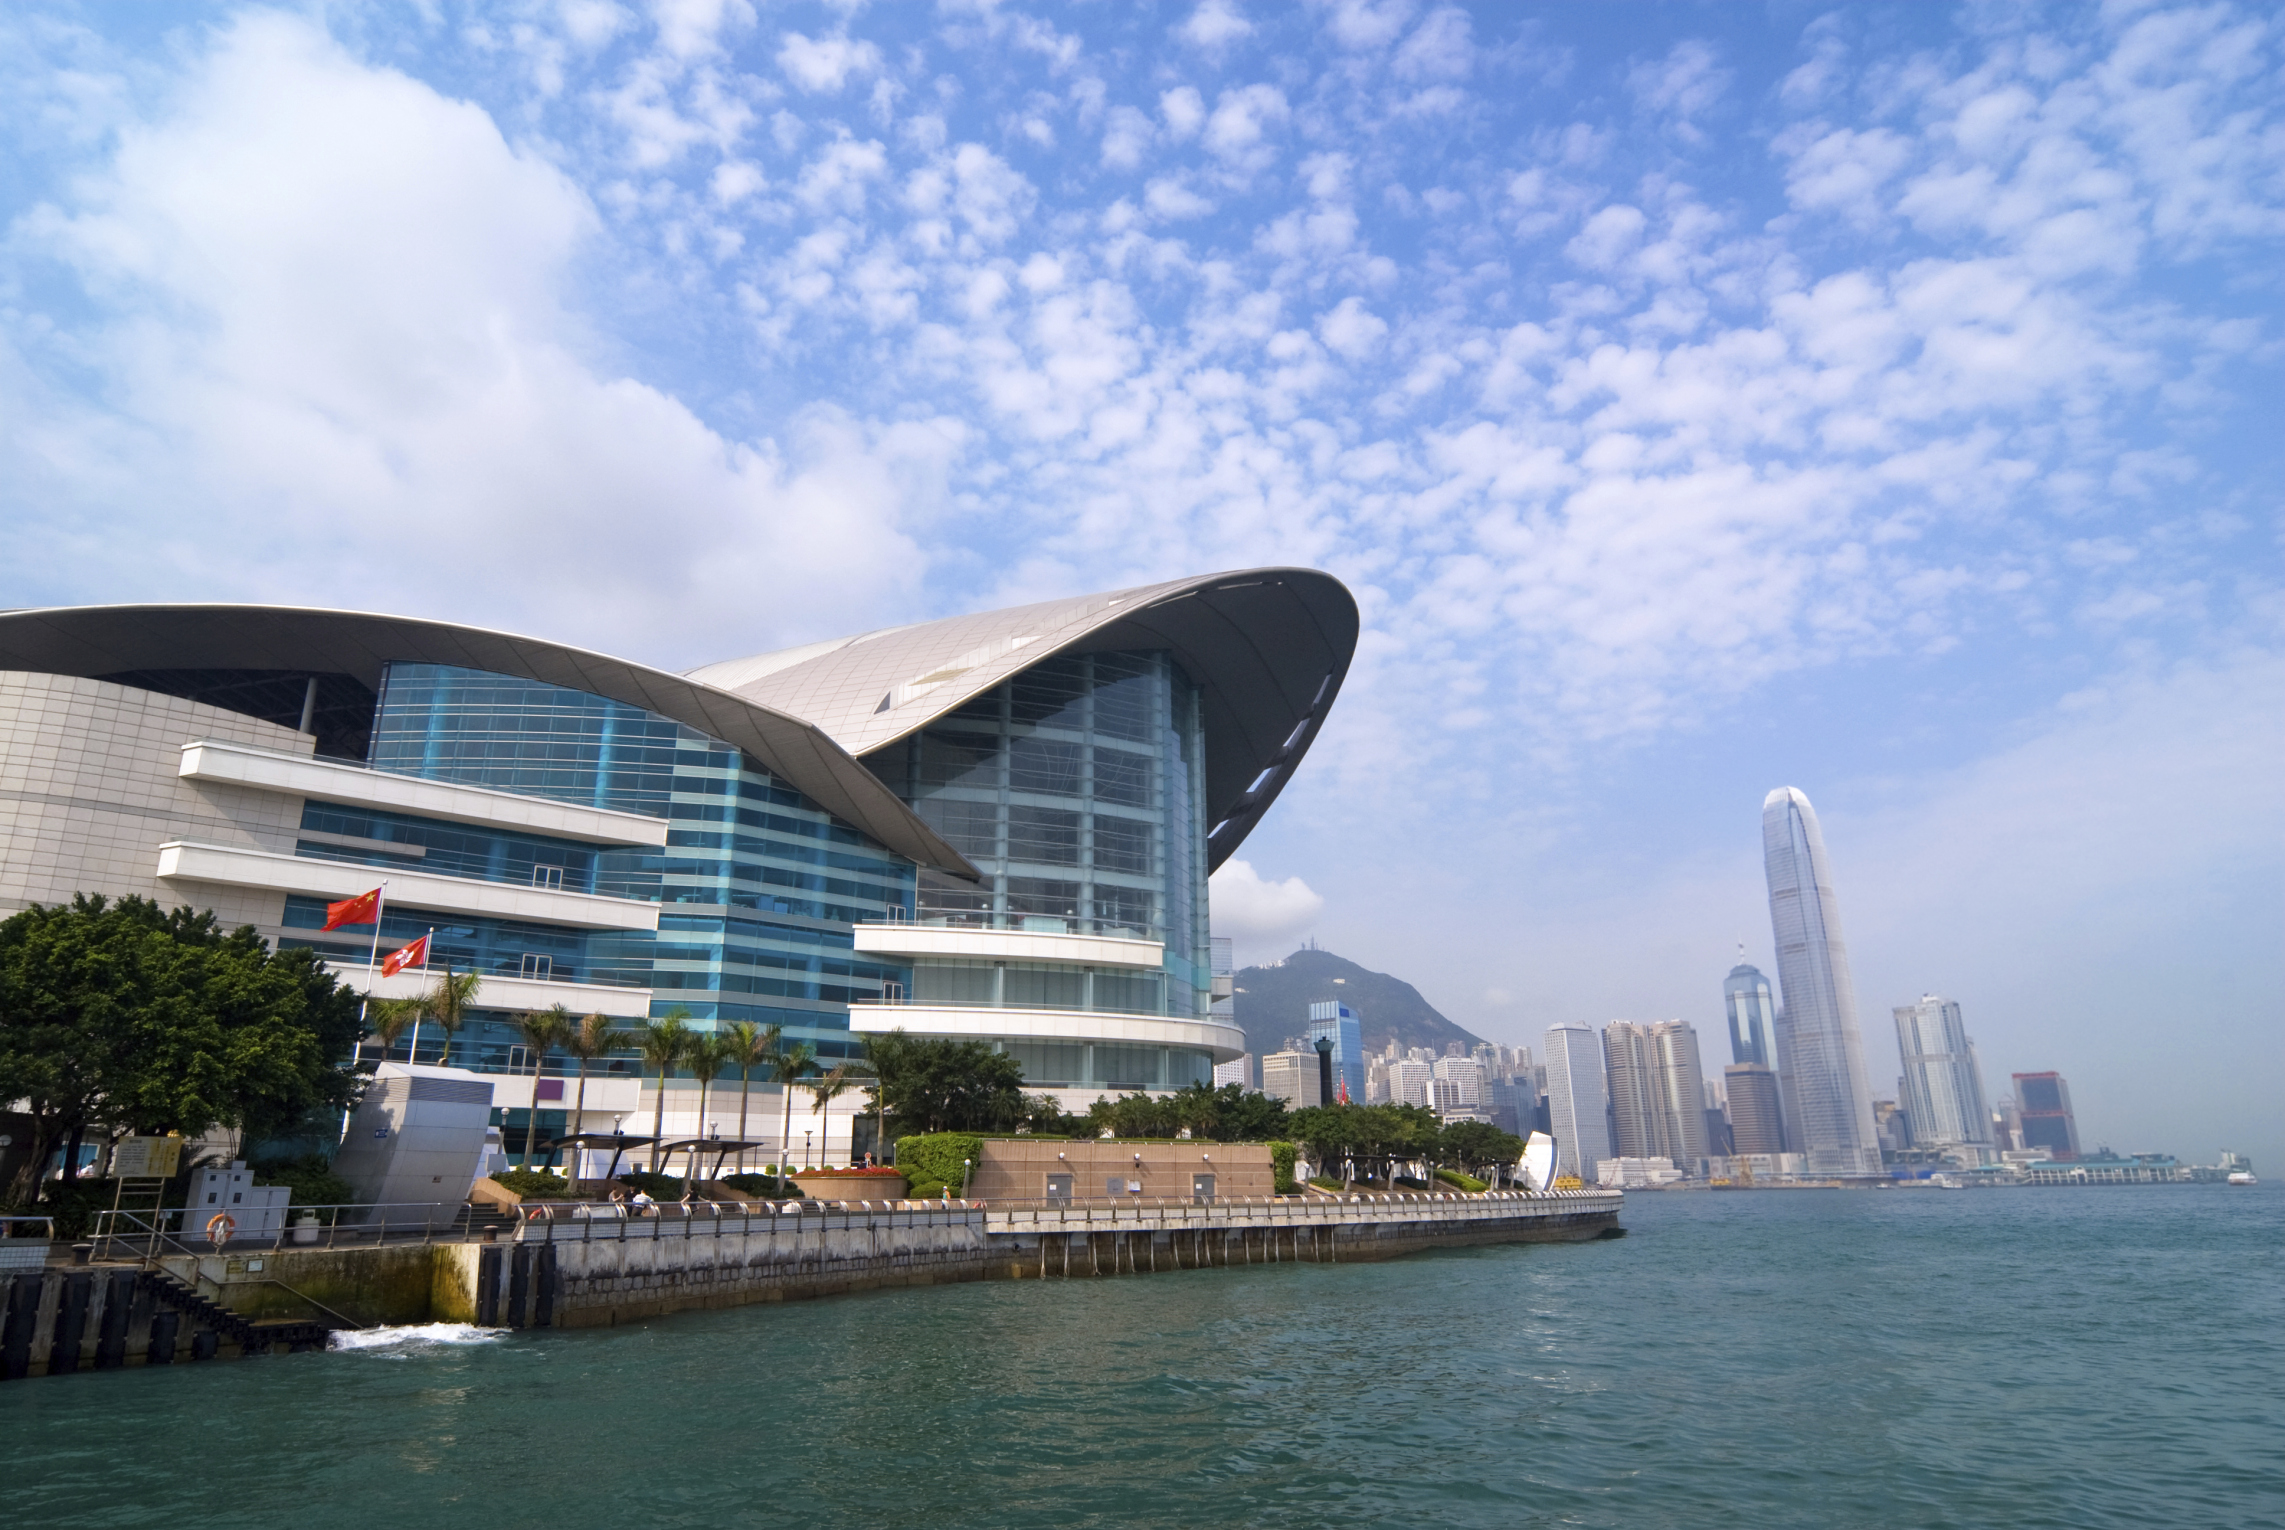 Convention and Exhibition Centre, Hong Kong